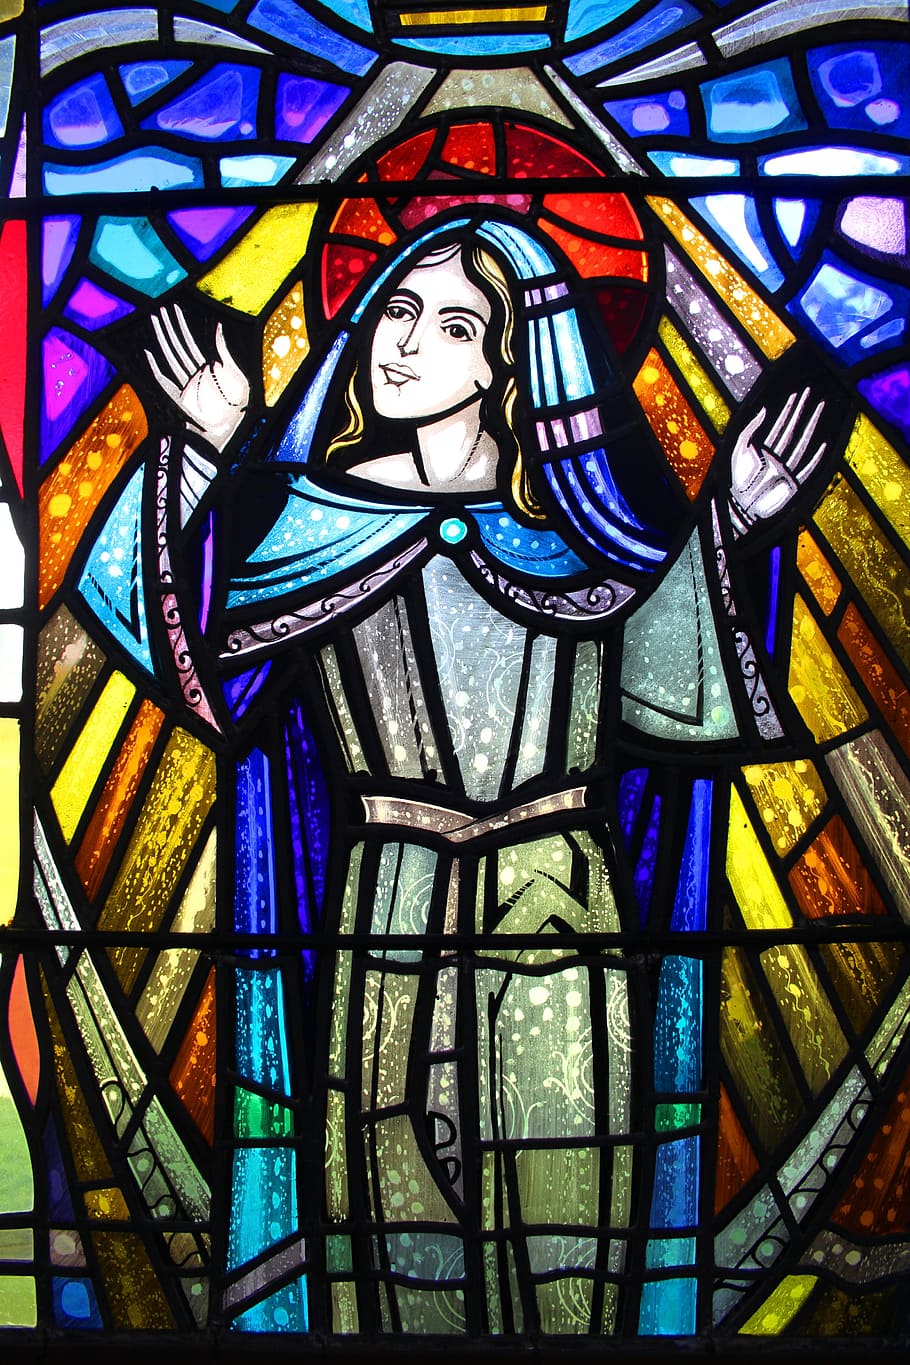 blue, red, yellow, religious, figure, stained, glass, stained glass, church window, colored glass